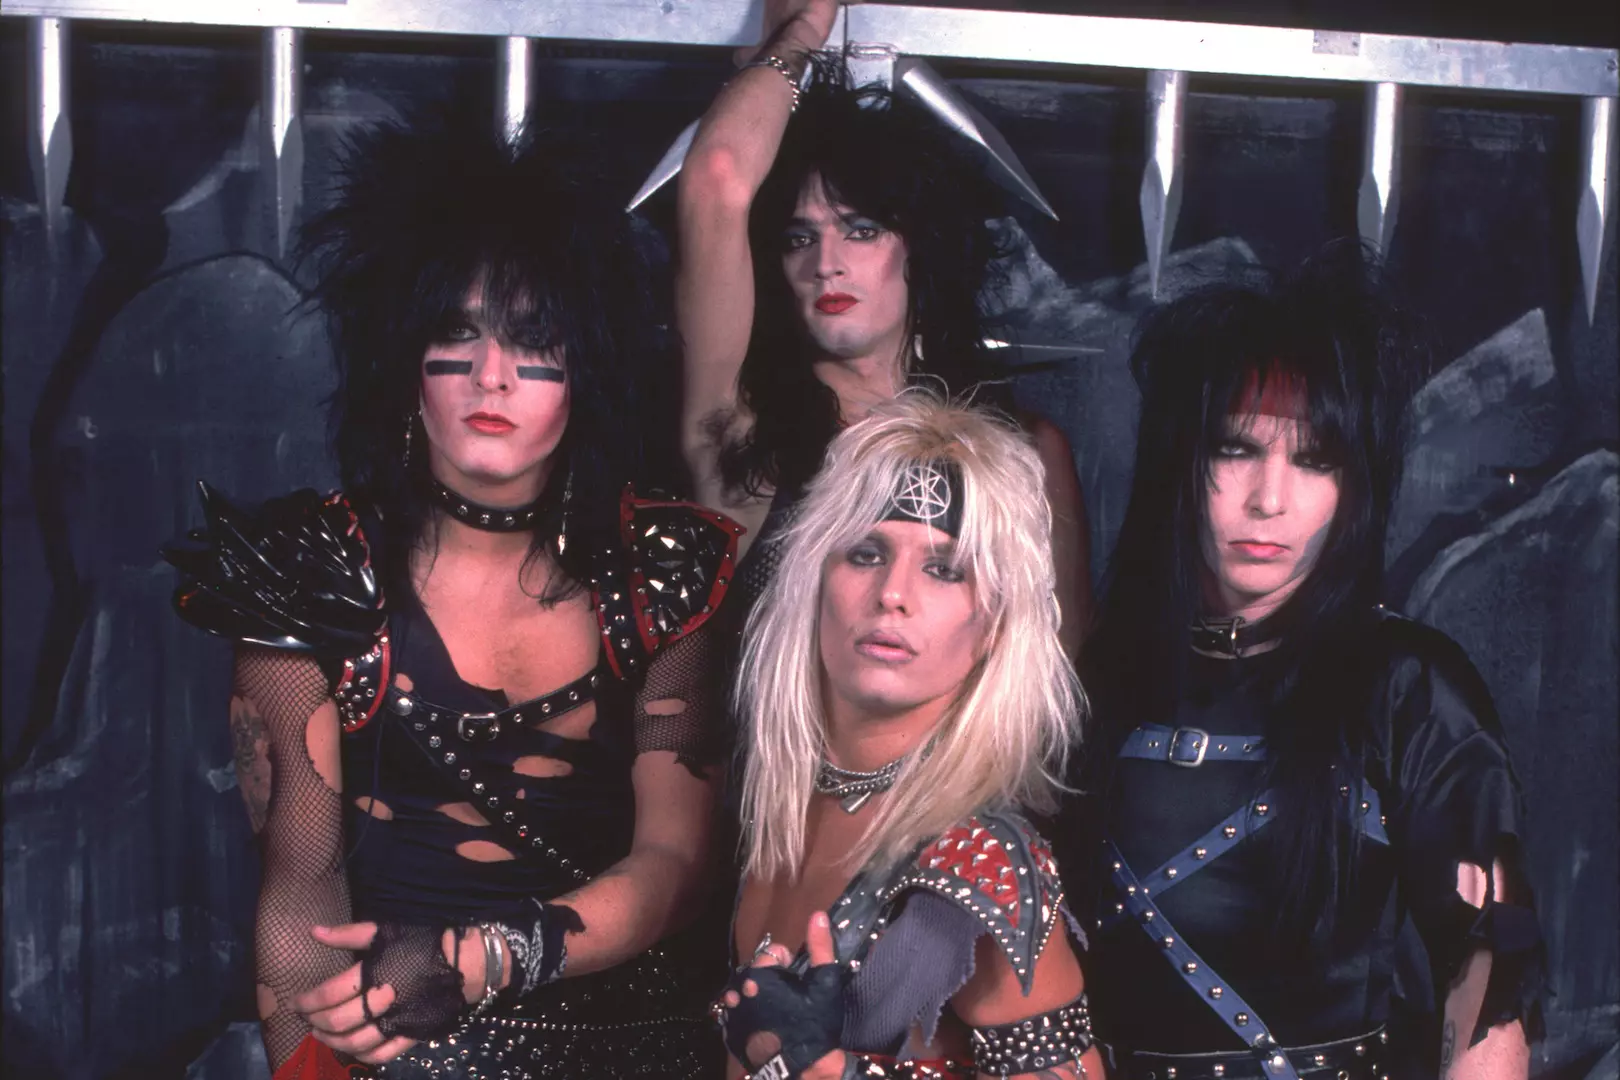 39 Years Ago: Motley Crue Release 'Shout at the Devil'